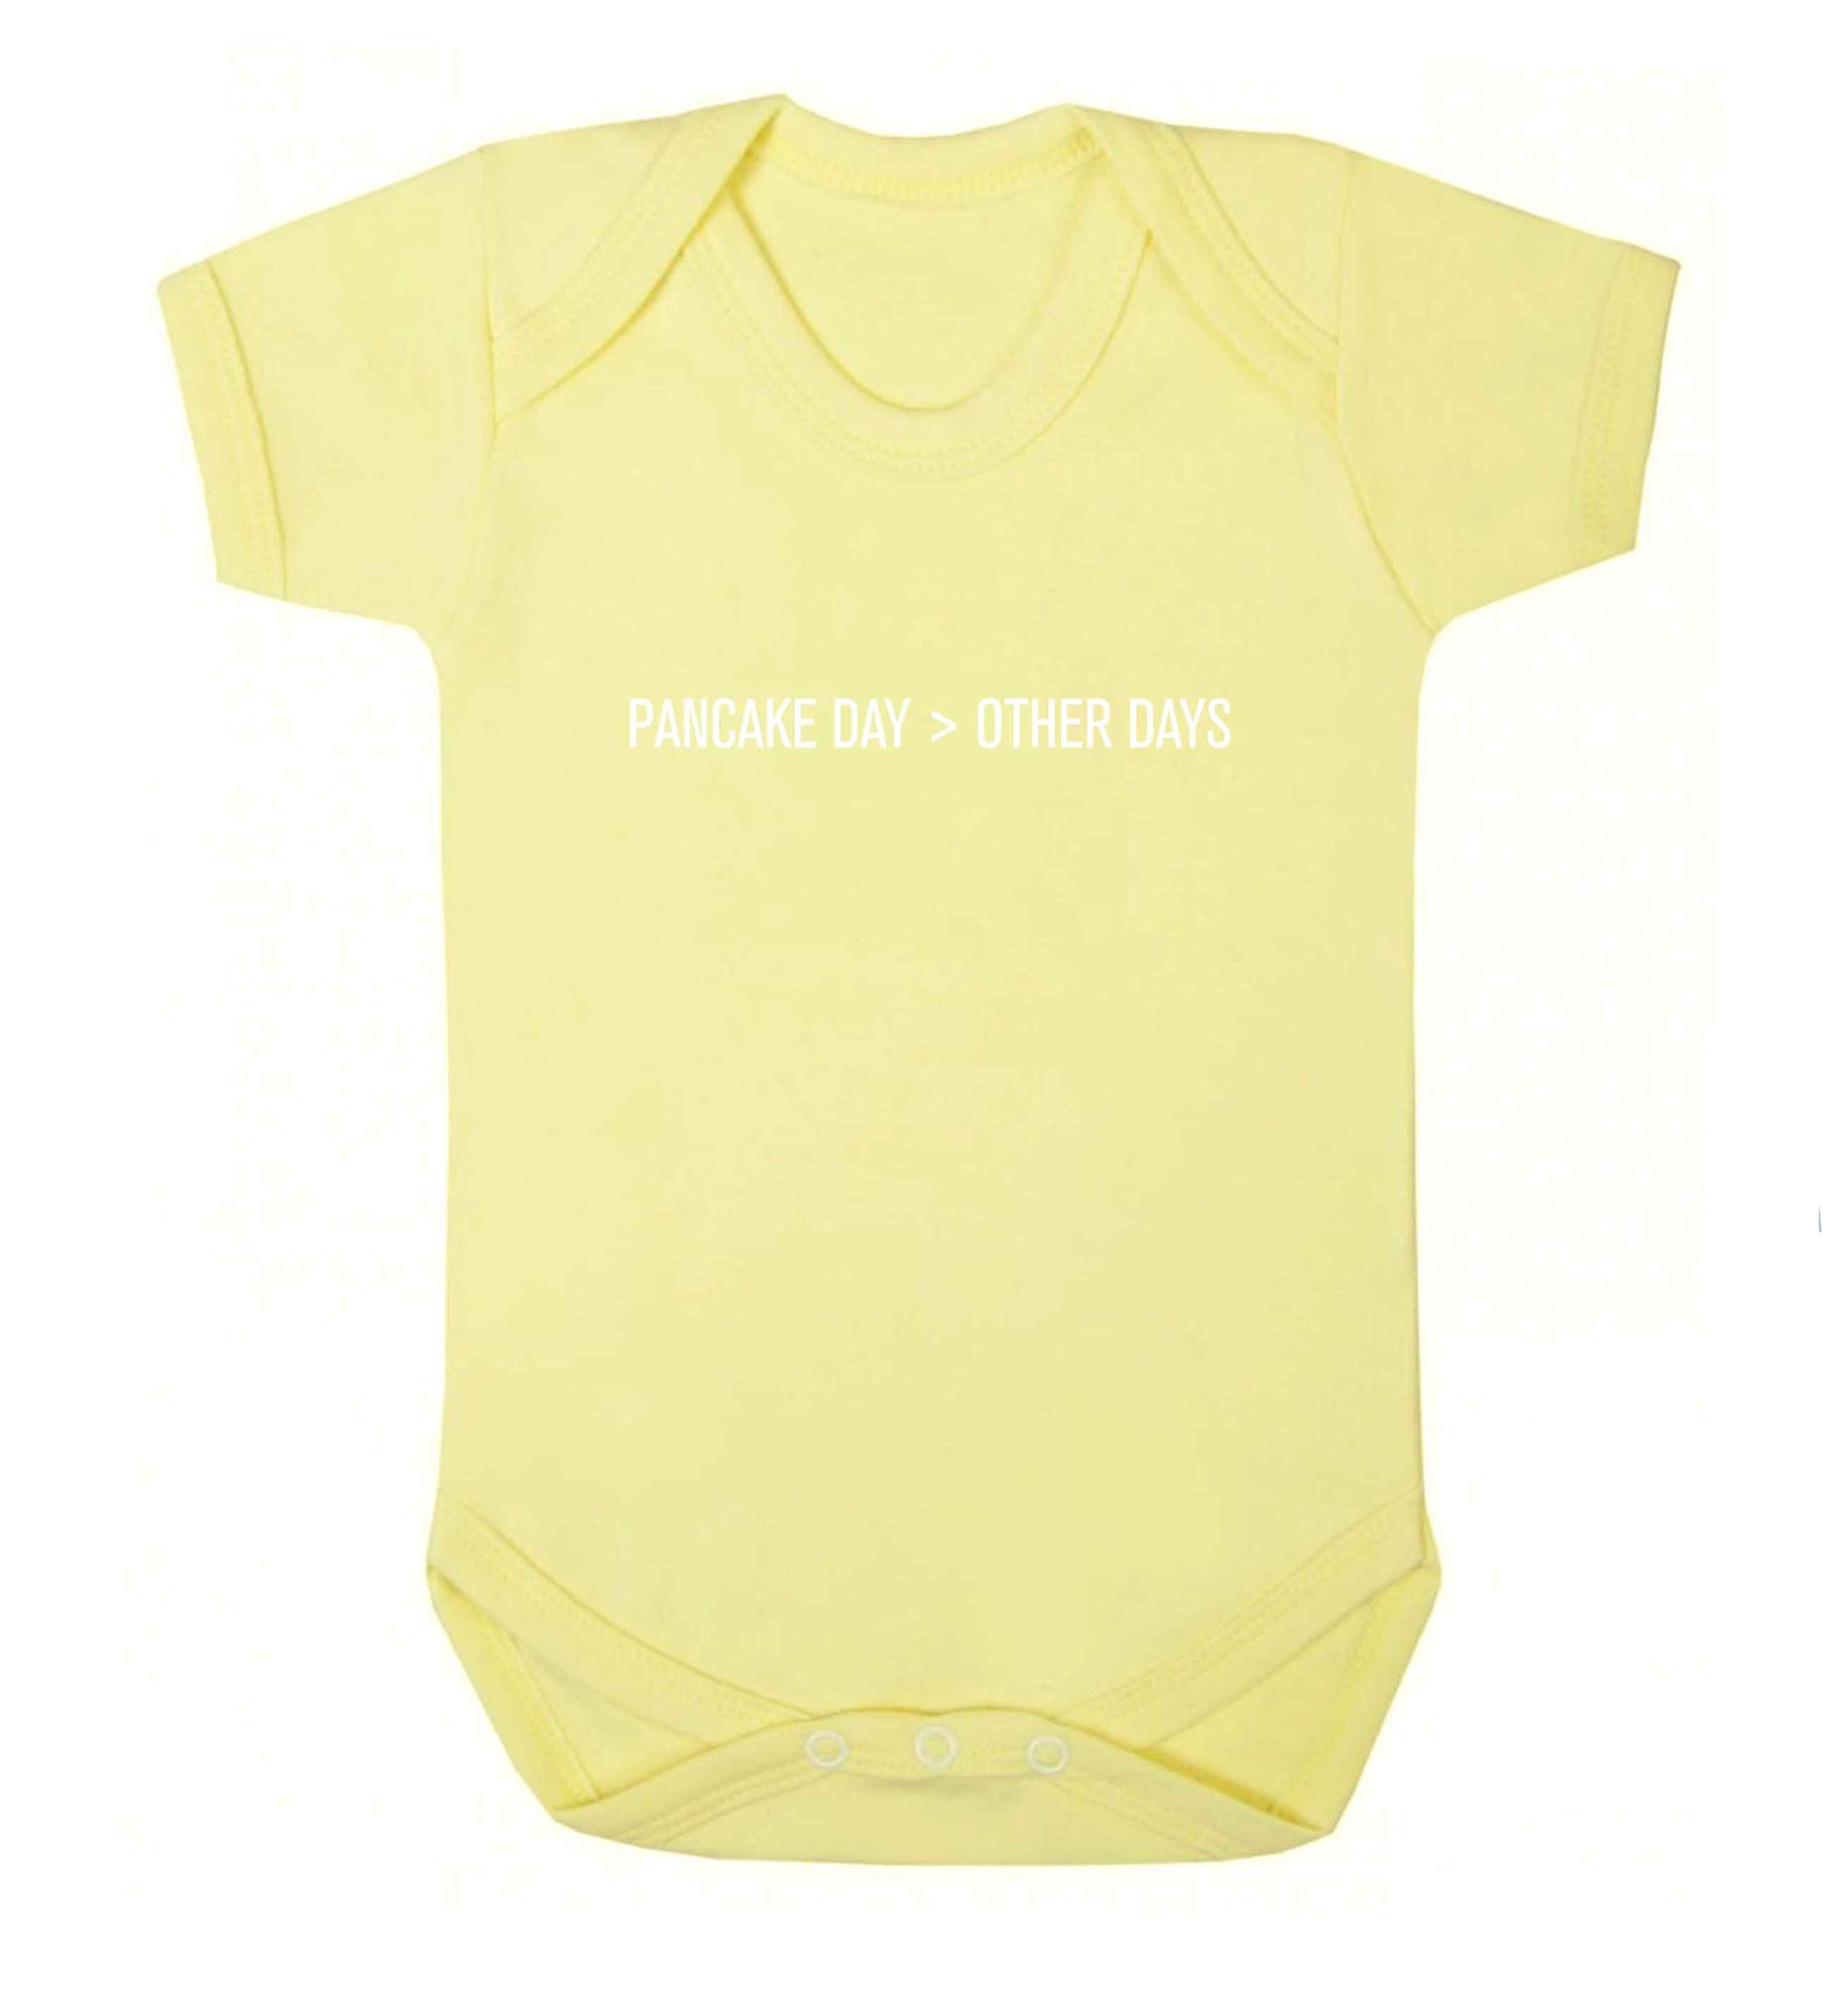 Pancake day > other days baby vest pale yellow 18-24 months